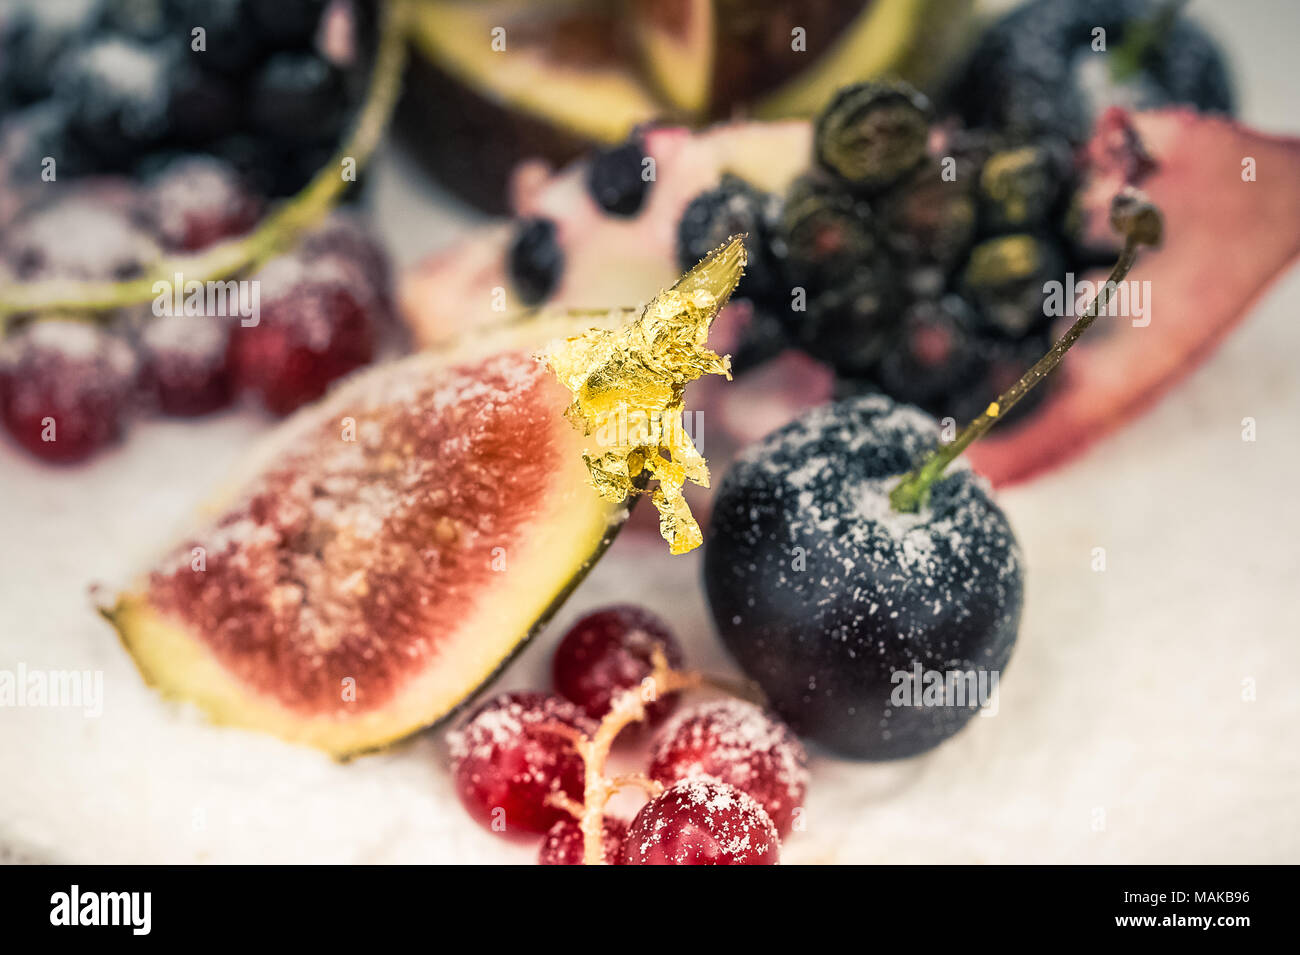 Candied fruit on a wedding cake Stock Photo